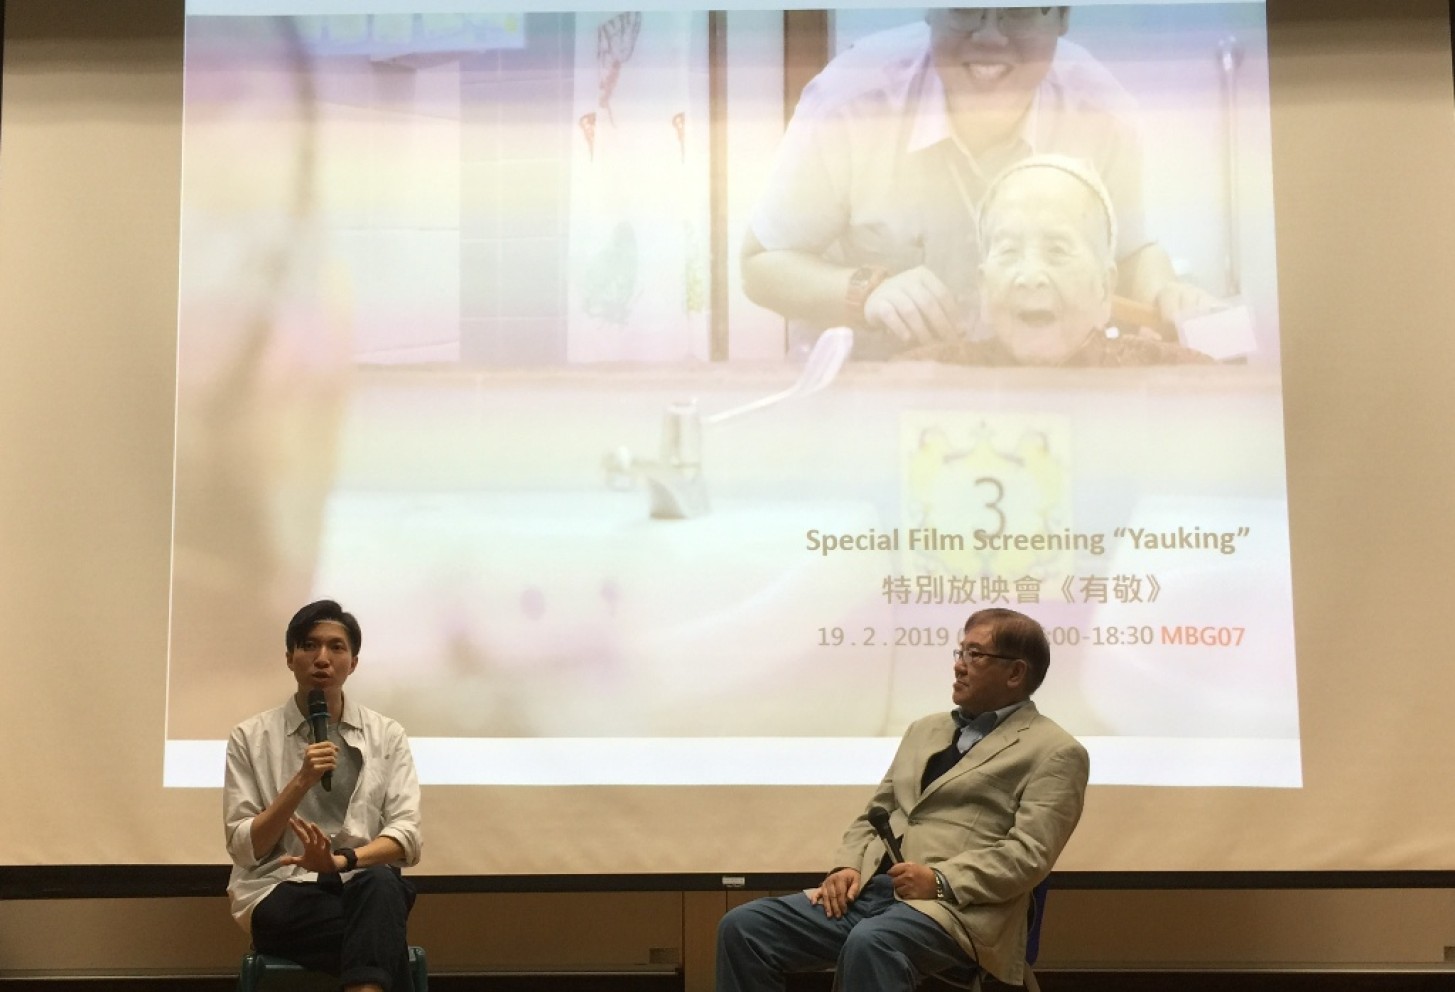 Prof WONG Yiu-Chung (right) moderates the post-screening discussion with film director WONG Siu-Pong.